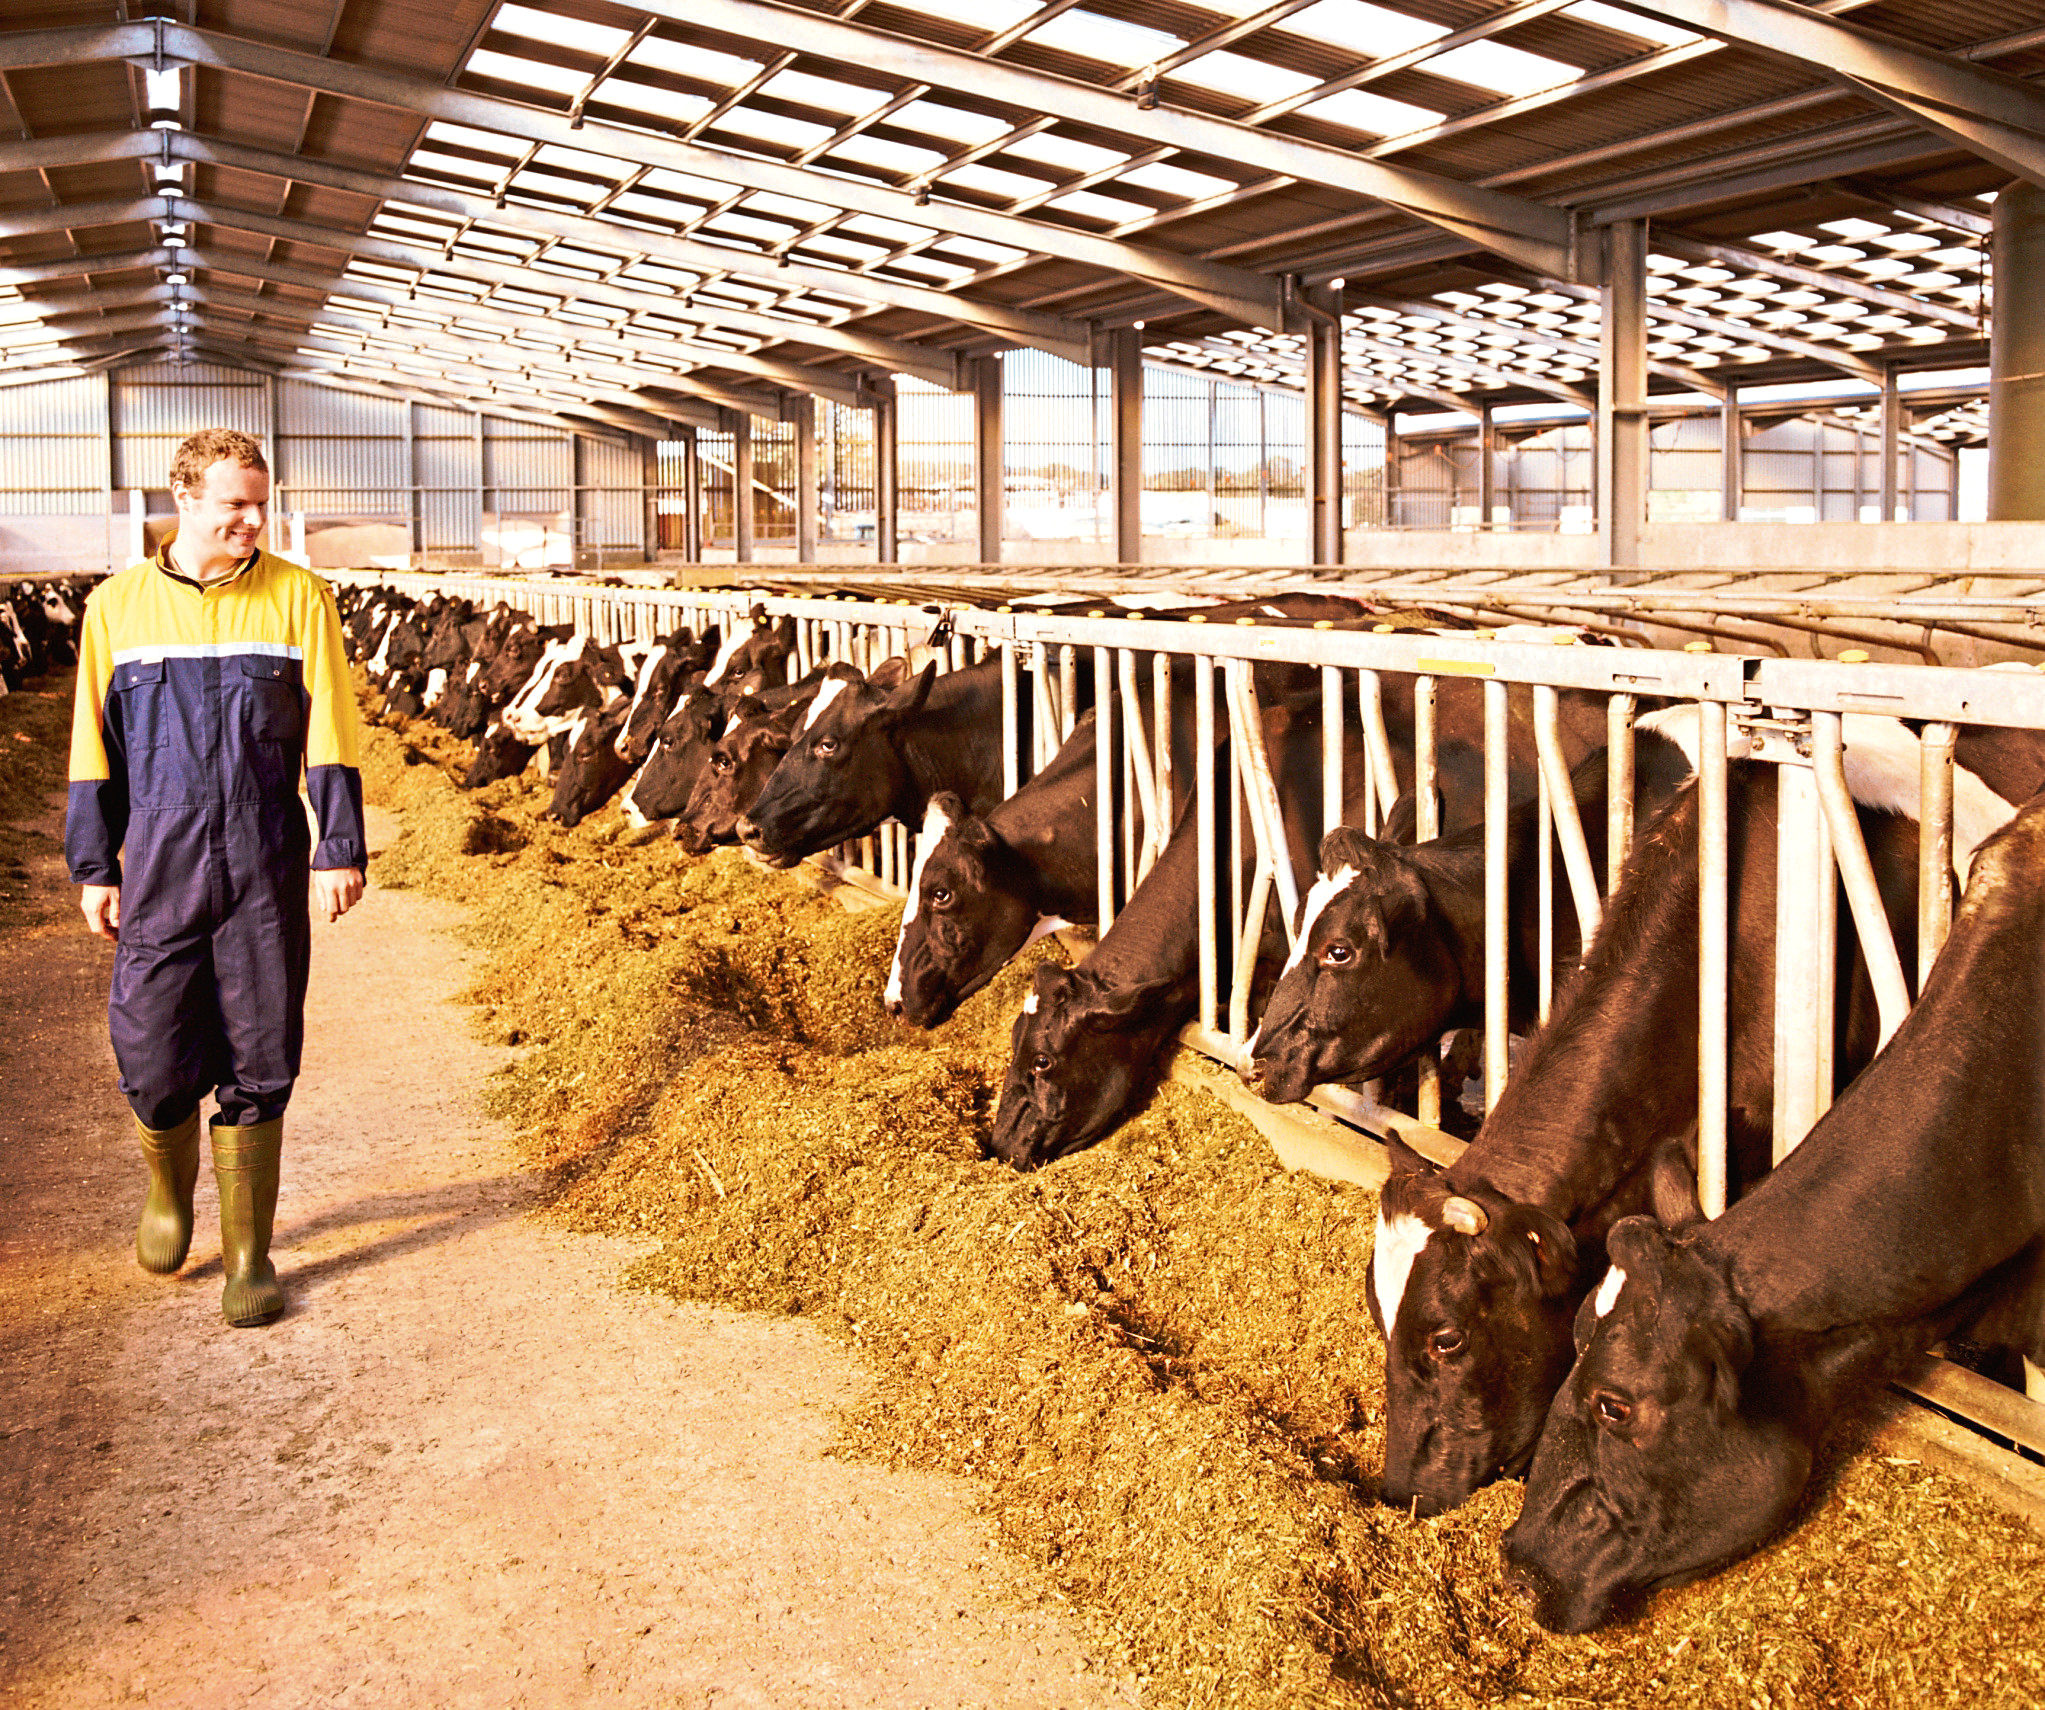 The database has been launched by EU dairy farmers' co-operative Arla.